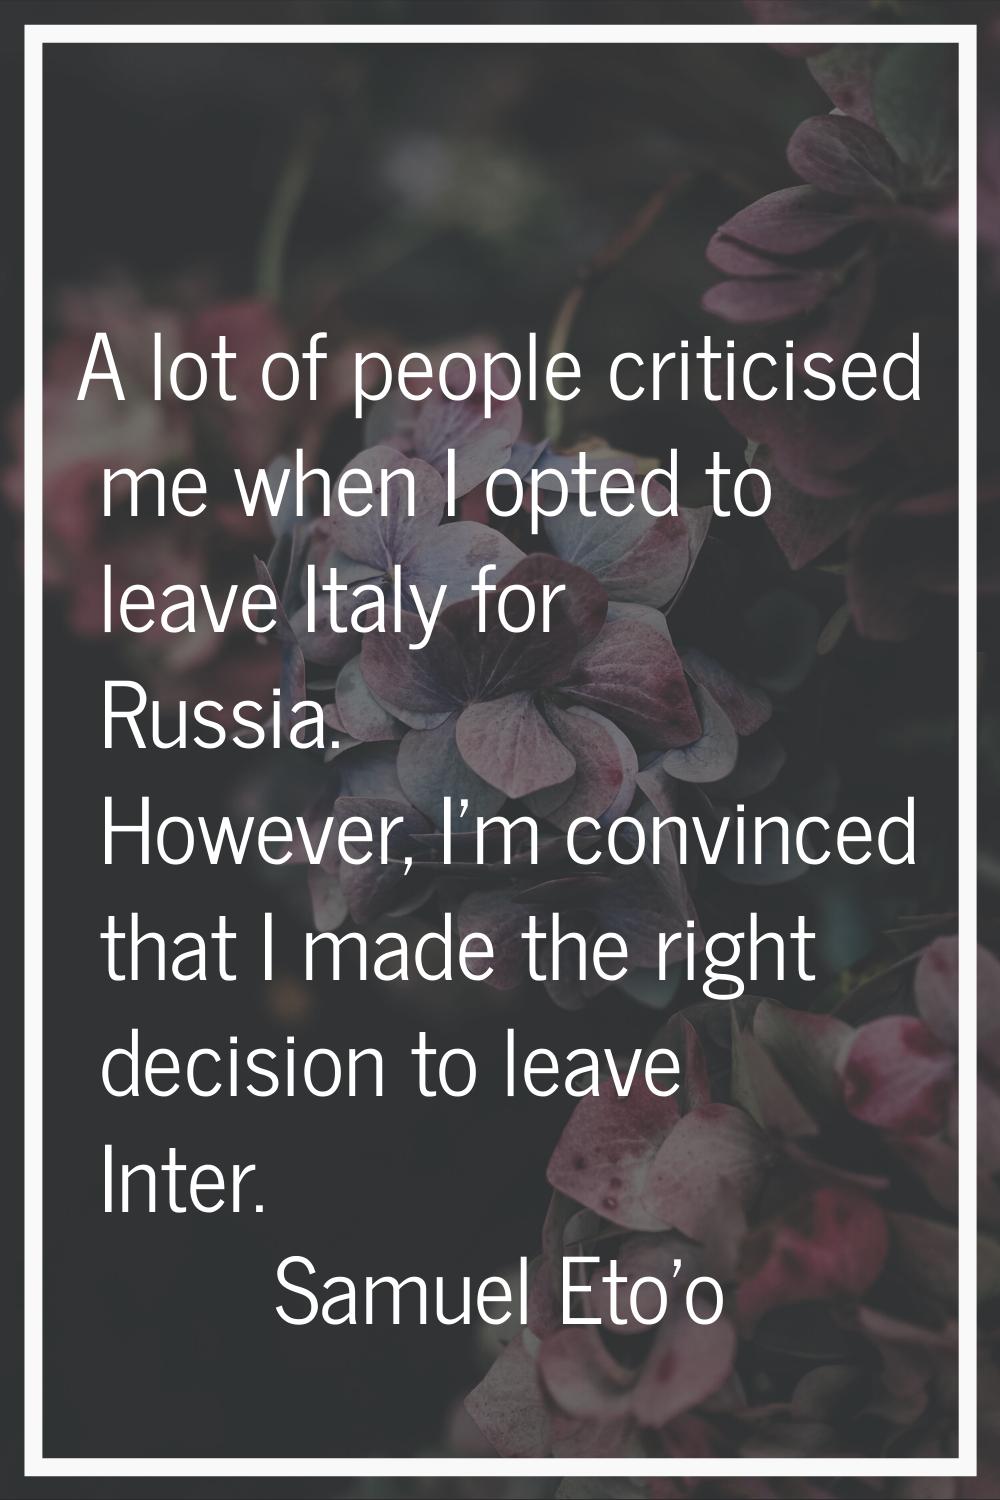 A lot of people criticised me when I opted to leave Italy for Russia. However, I'm convinced that I